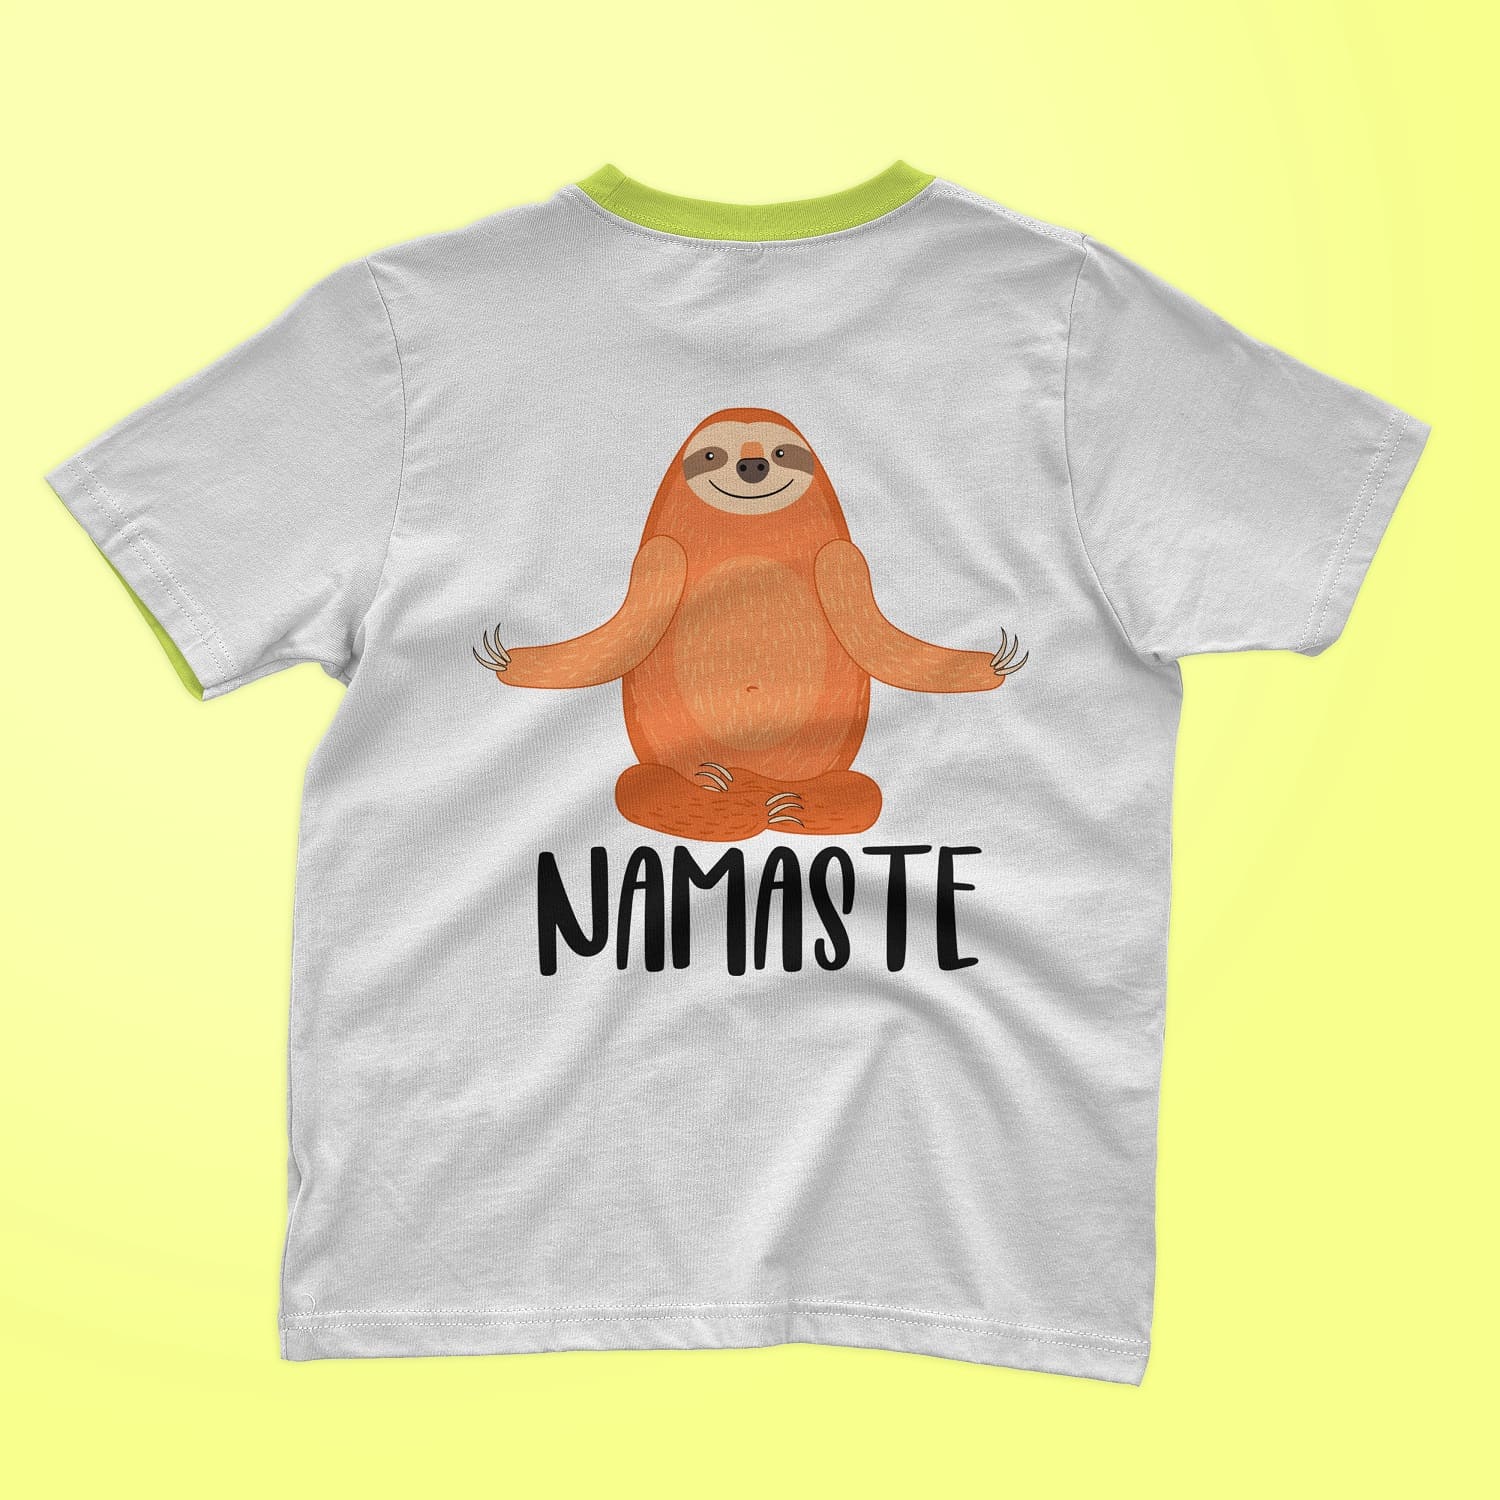 An image of a sloth with long claws and the inscription Namaste on a light gray t-shirt.